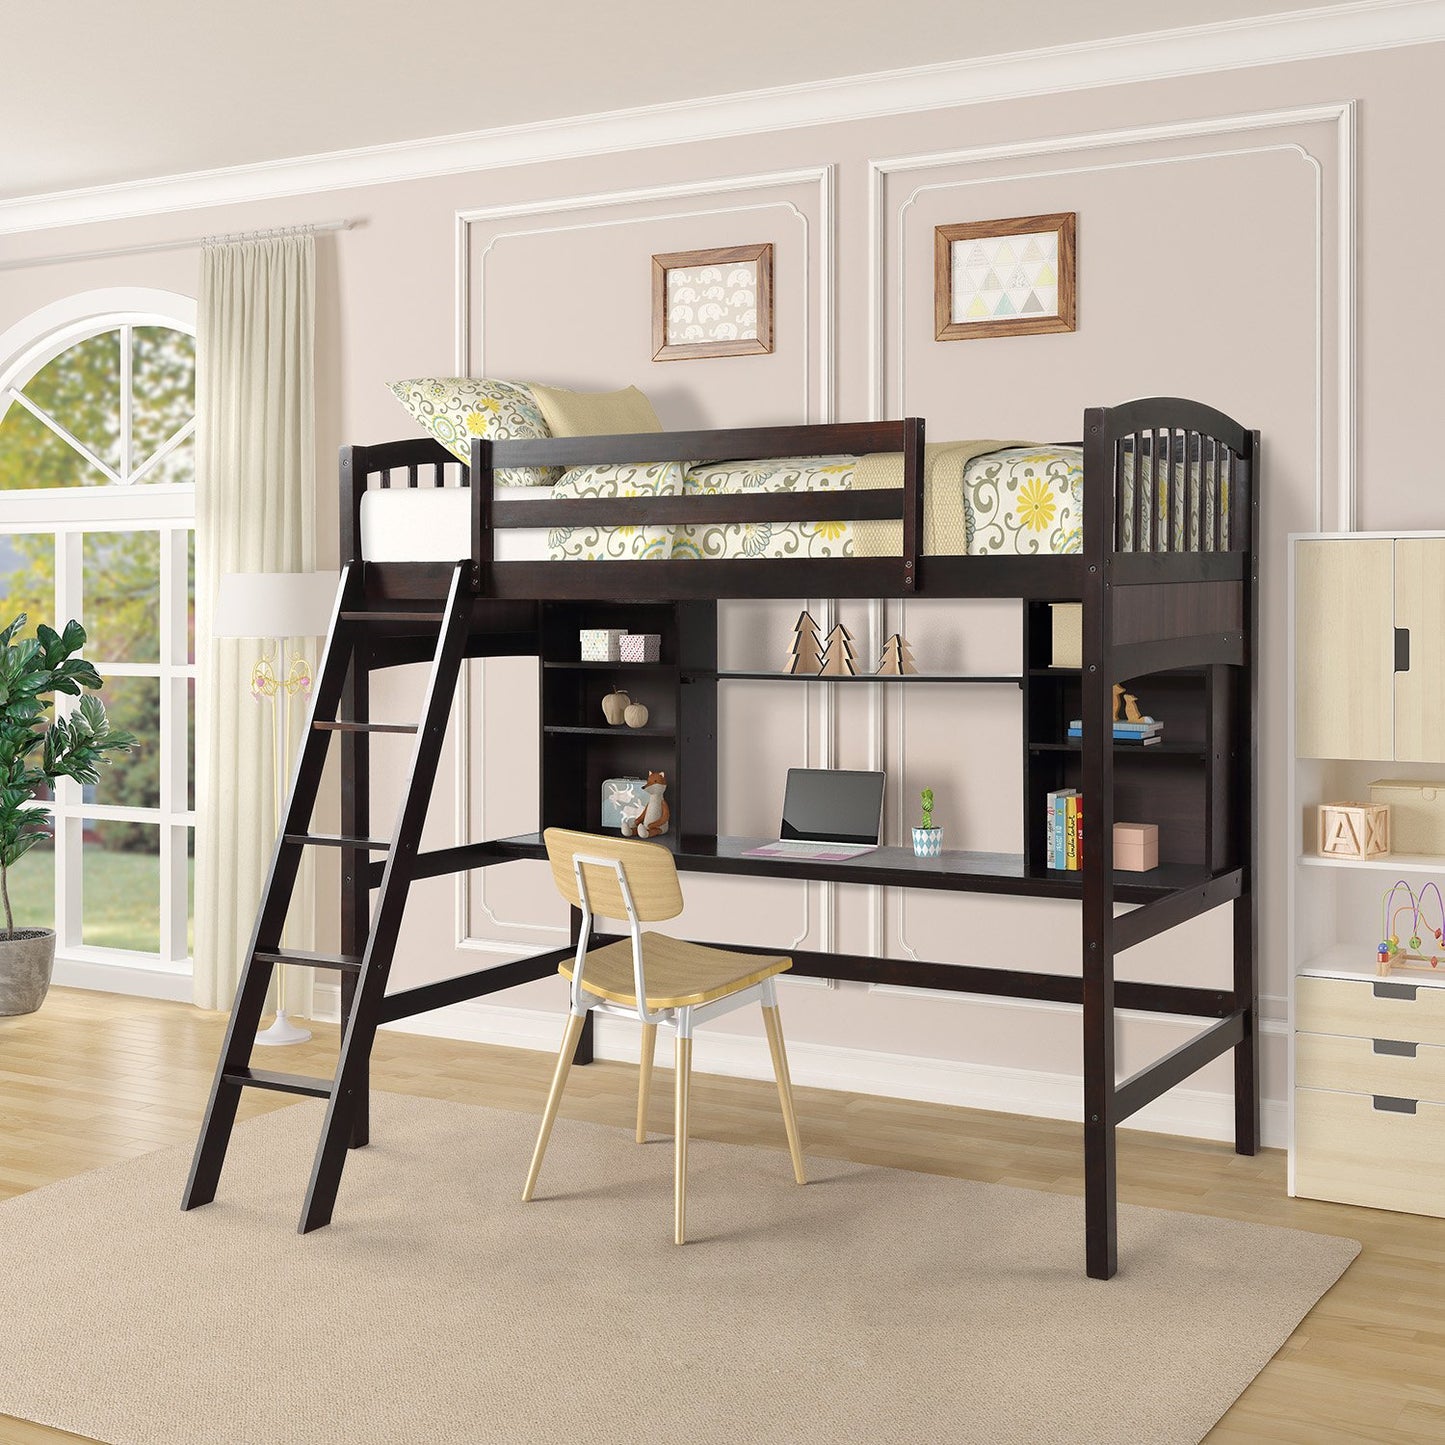 Twin Espresso Pinewood Loft Bed with Storage, Shelves, Desk and Ladder-Loft Bed-HomeDaybed